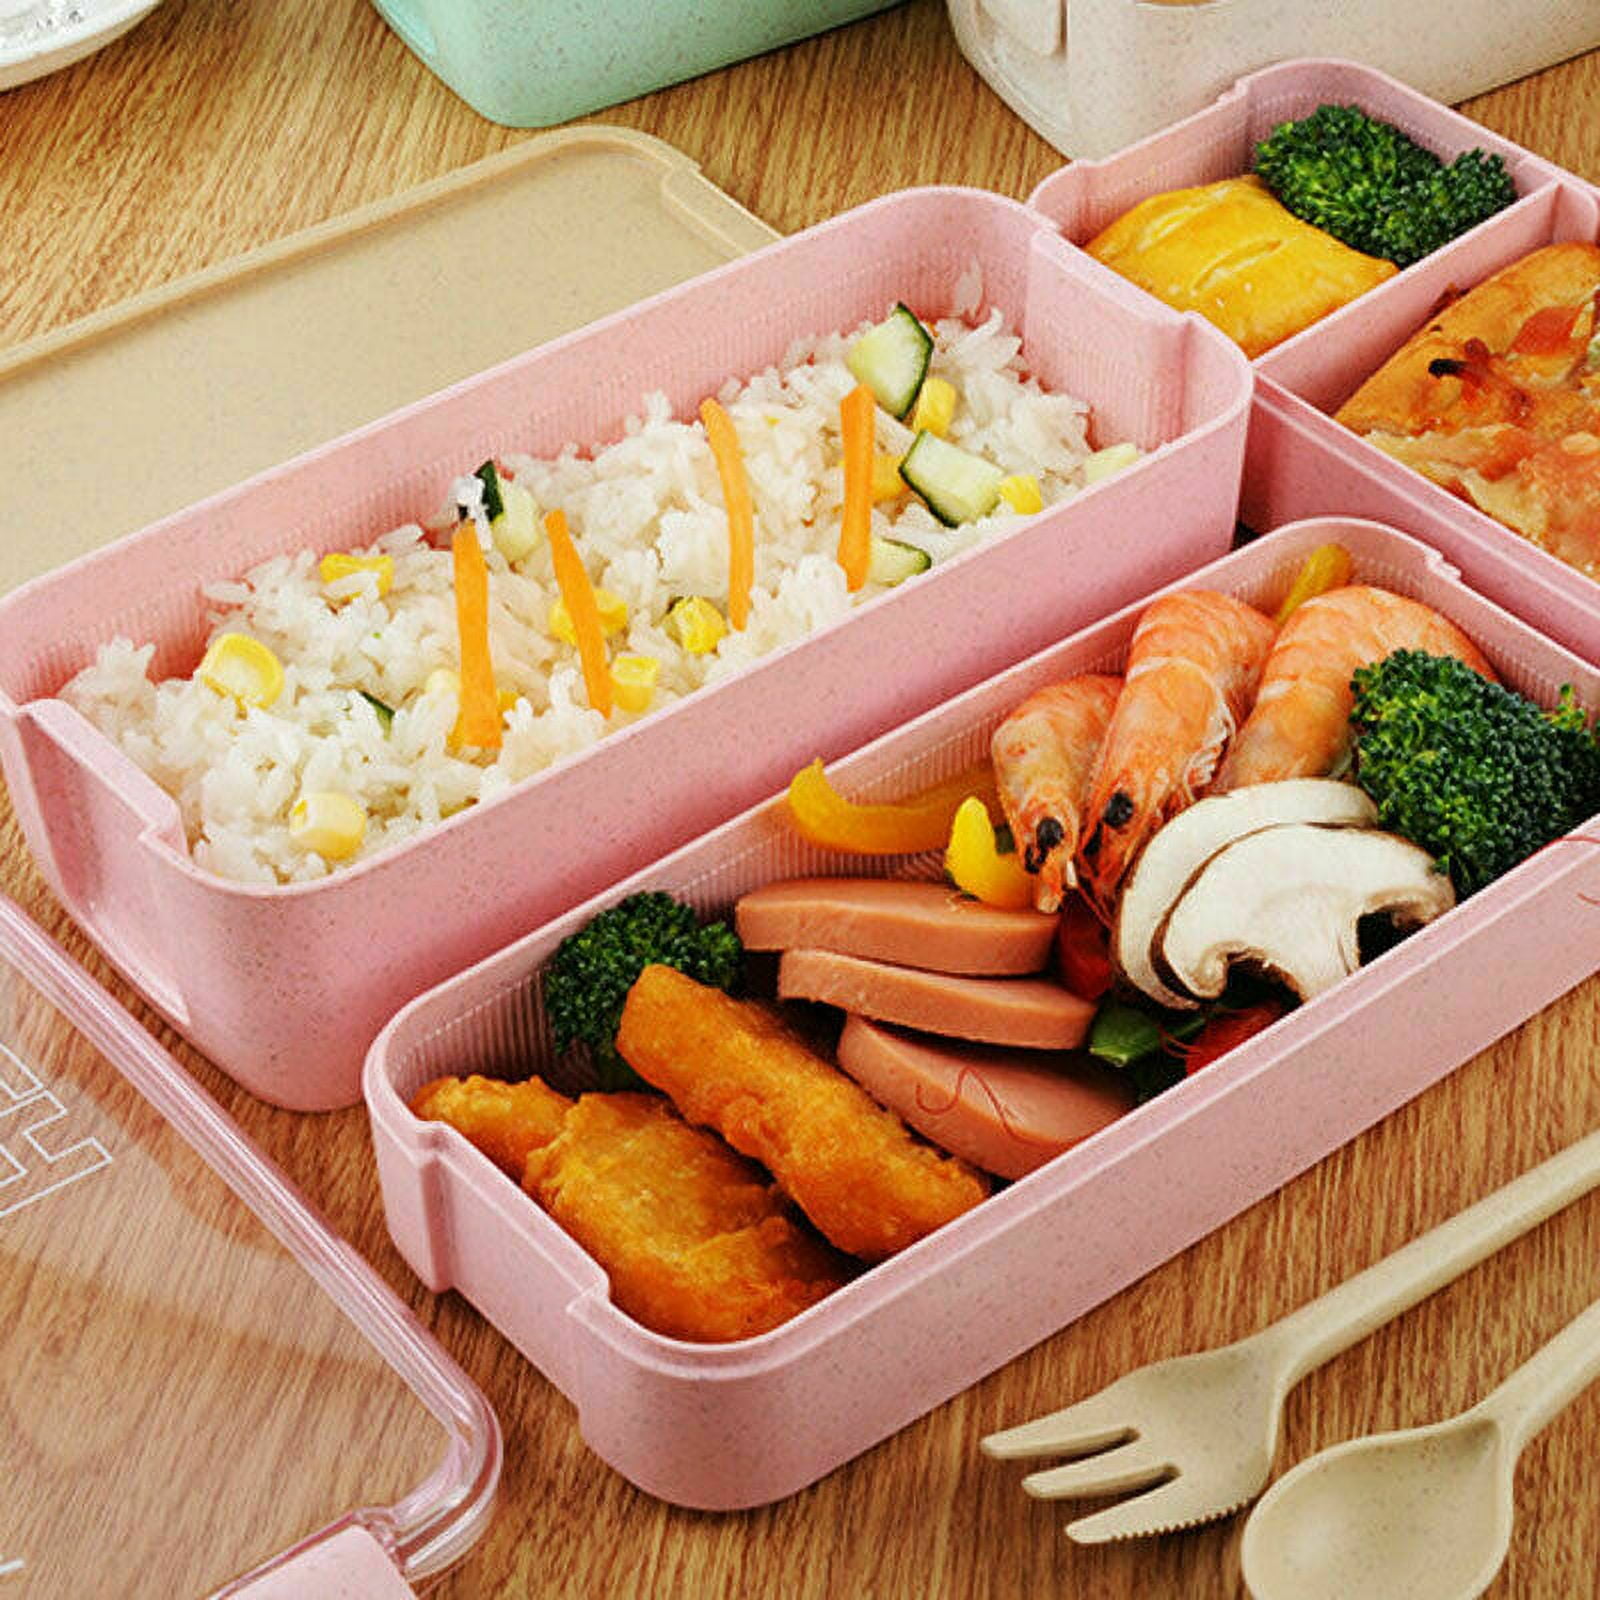 Bento Box Japanese Lunch Box Kit for Kids/Adult,Wheat Straw, Lunch  Containers Microwave Safe,3 Layer Stackable Leakproof Lunch Box 